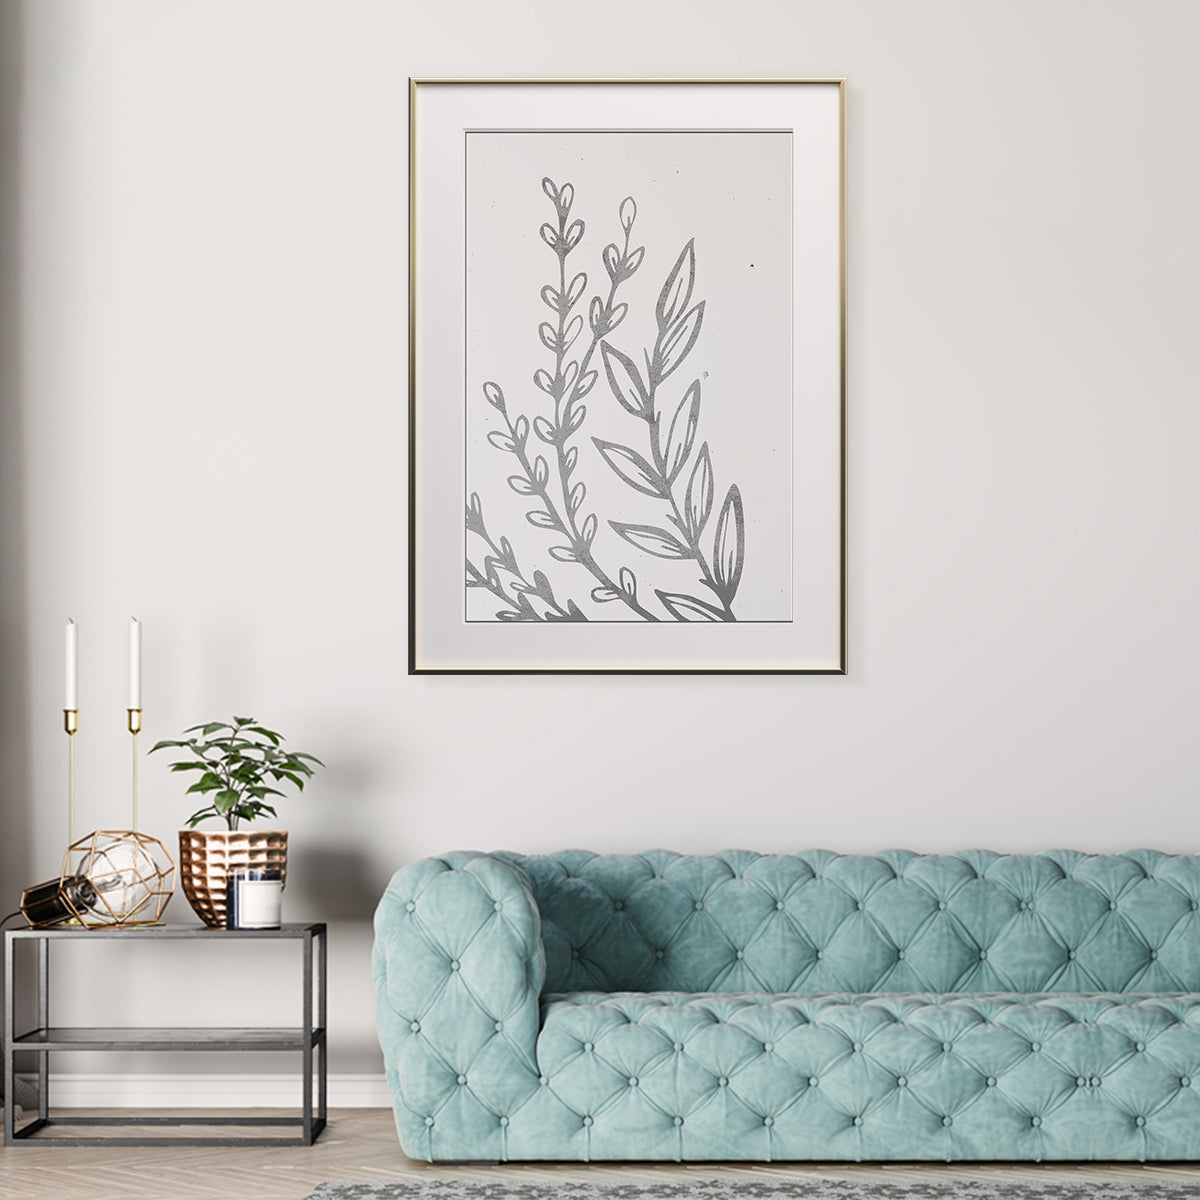 Vintage Gray Leaves Poster Wall Art Decor-Vertical Posters NOT FRAMED-CetArt-8″x10″ inches-CetArt